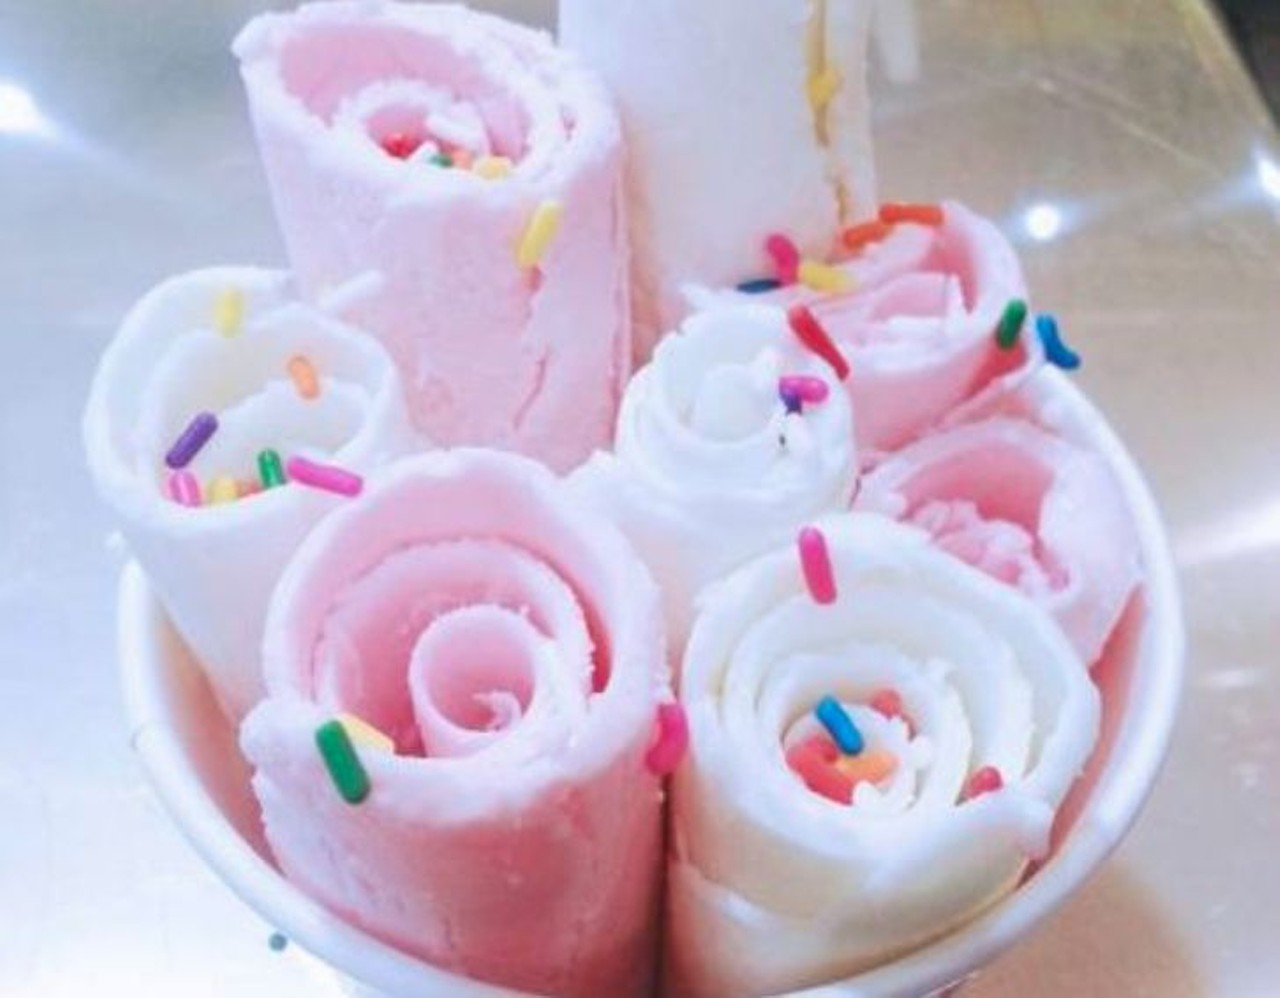 Rolled Ice Cream
Multiple locations 
Beautiful ice cream rolls in various flavors and crispy taiyaki waffles are the stars at Rolled. Get a bowl and some of their fish-shaped taiyaki filled with red bean paste or Bavarian cream. 
Photo via Rolled Ice Cream